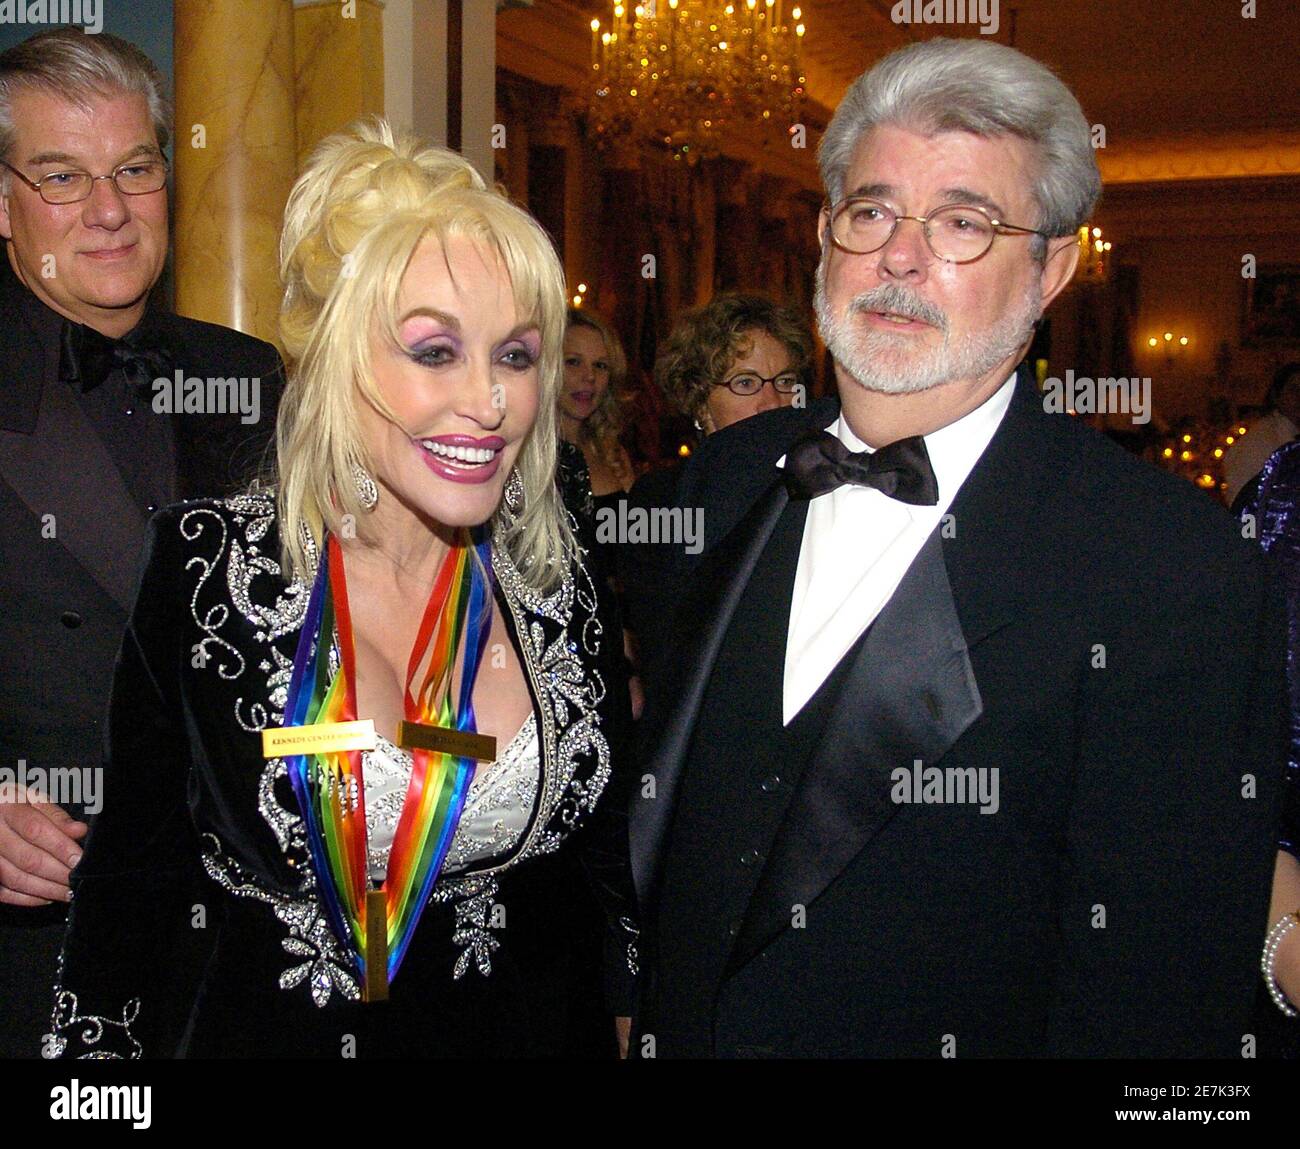 2006 Kennedy Center Honoree singer Dolly Parton (L) and film producer George Lucas walk out of the State Dining Room at the conclusion of the evening gala on December 2, 2006 in Washington.    REUTERS/Mike Theiler (United States) Stock Photo